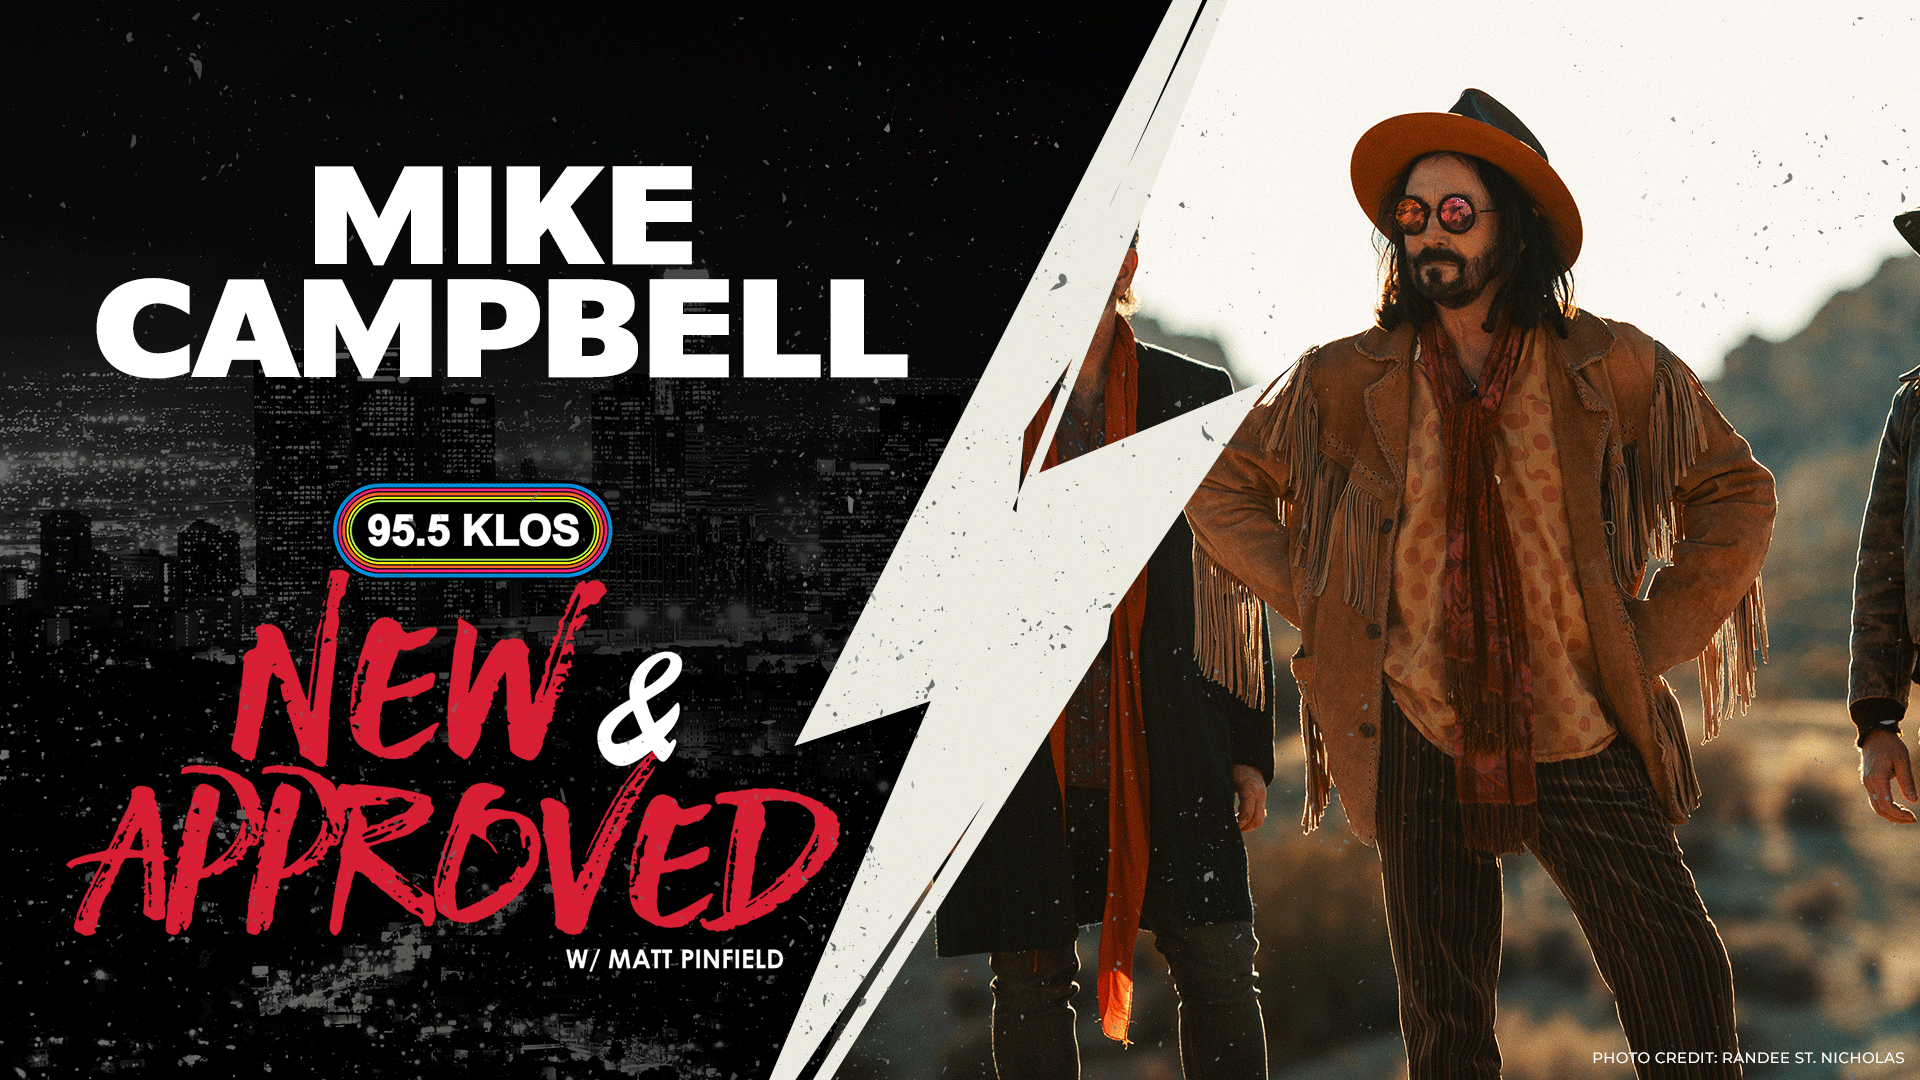 Mike Campbell Talks Dirty Knobs and Heartbreakers With Matt Pinfield On New & Approved